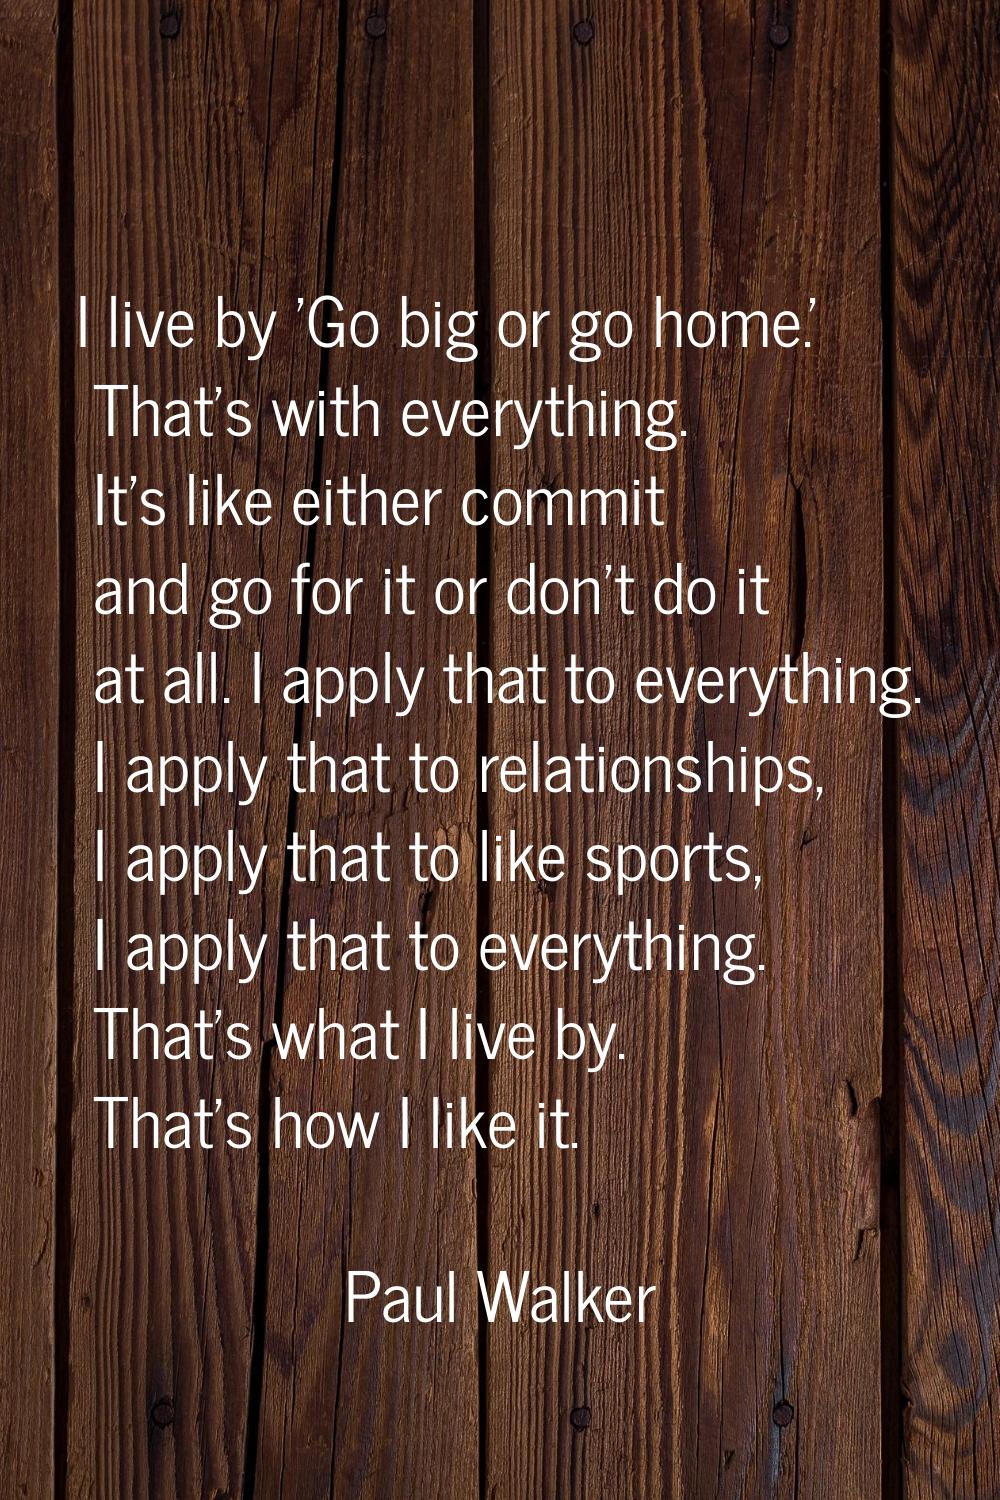 I live by 'Go big or go home.' That's with everything. It's like either commit and go for it or don